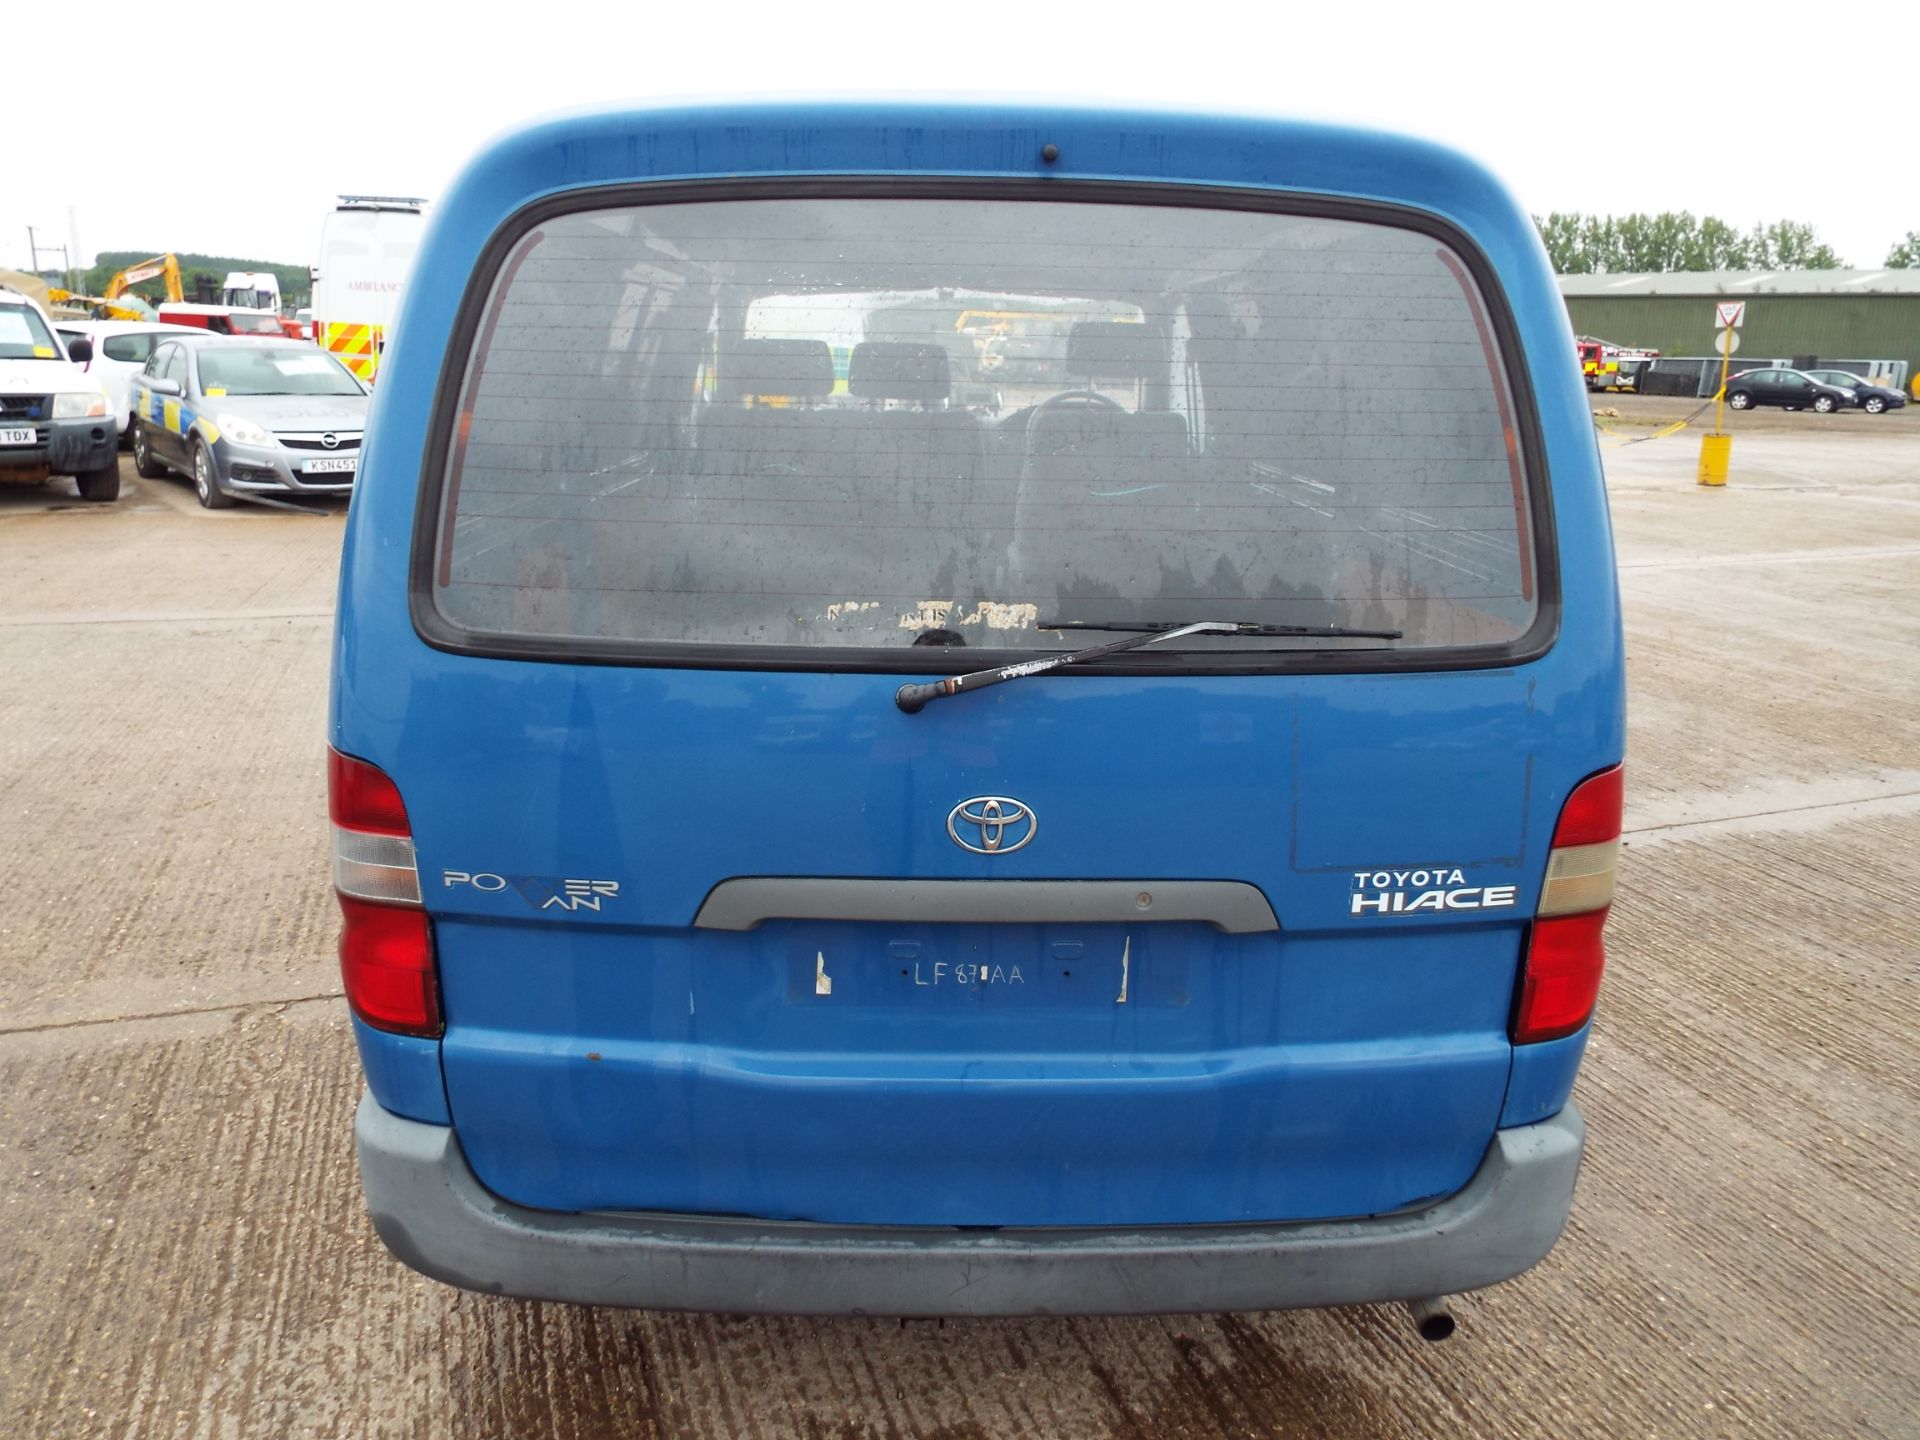 Toyota Hiace 2.4 D - Image 6 of 21